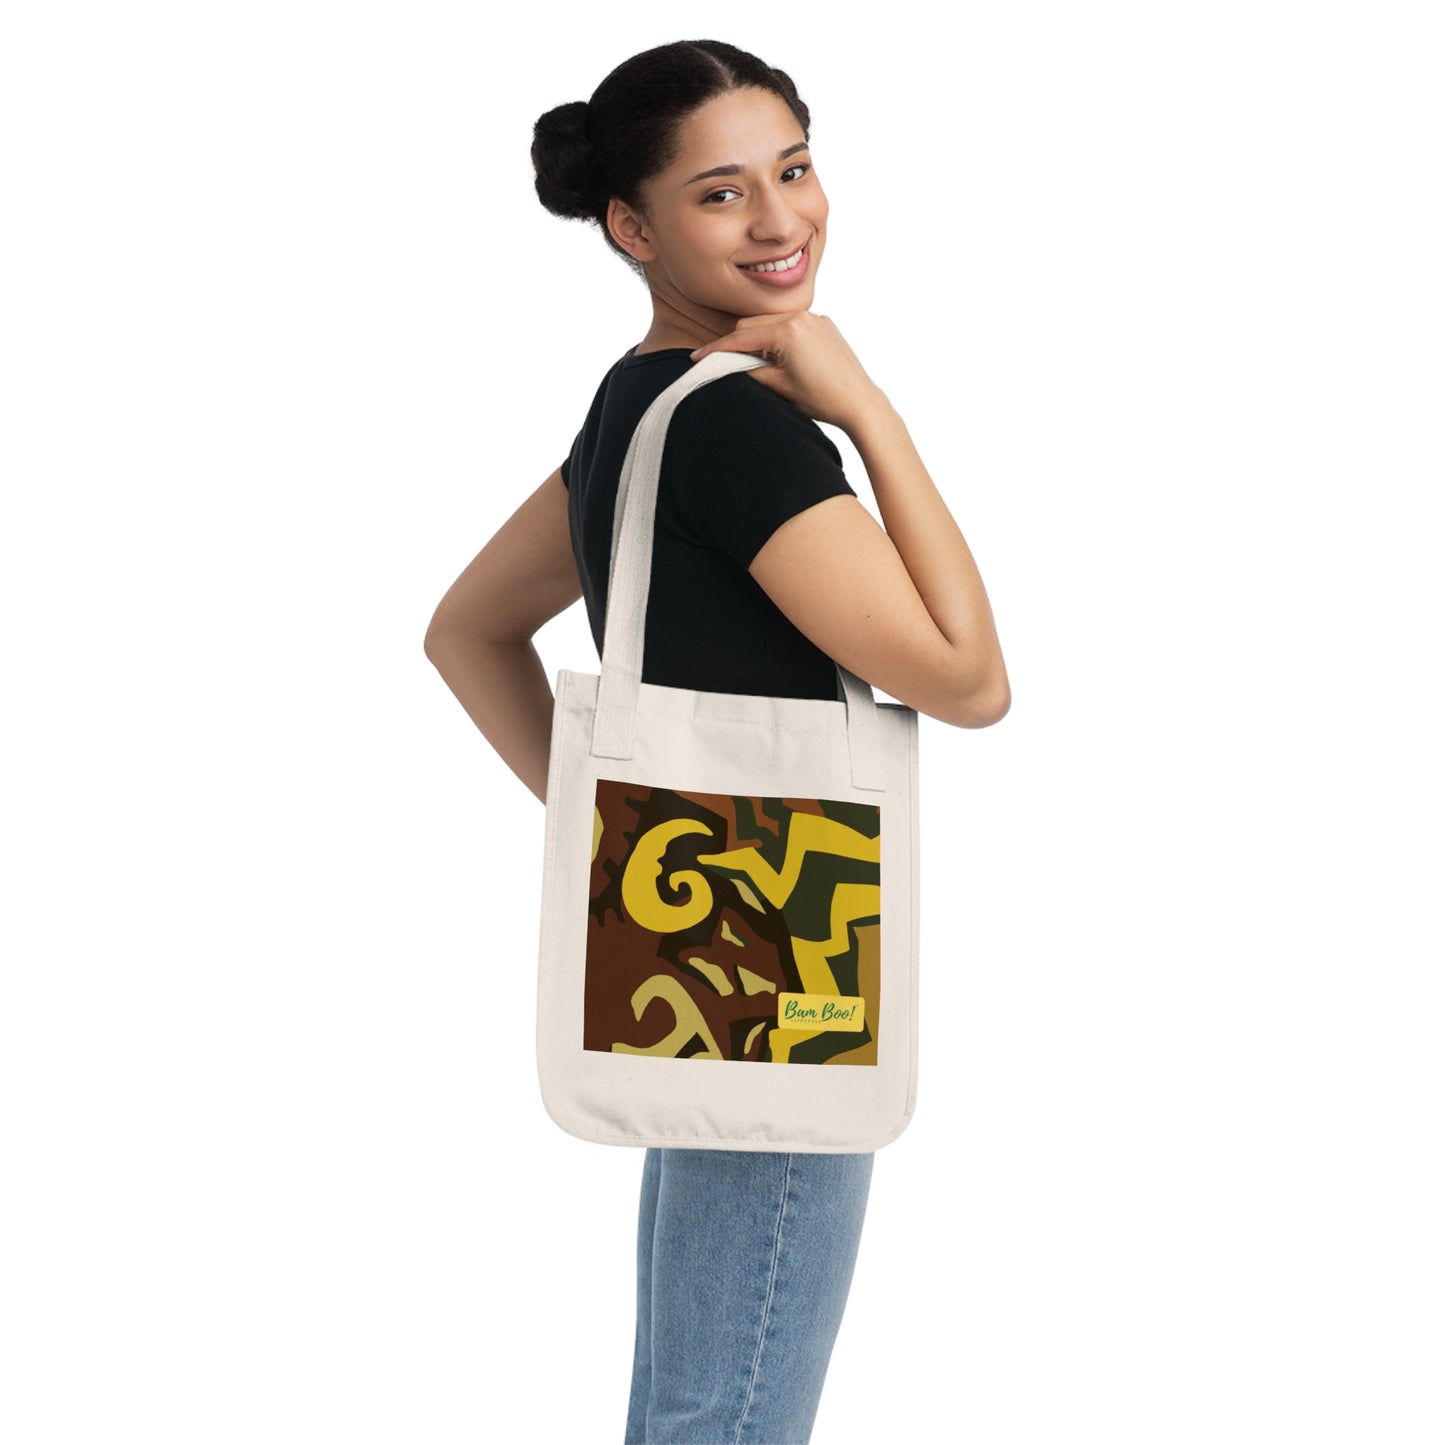 "Abstract Reflection: Exploring Unconventional Perspectives with Color and Form" - Bam Boo! Lifestyle Eco-friendly Tote Bag